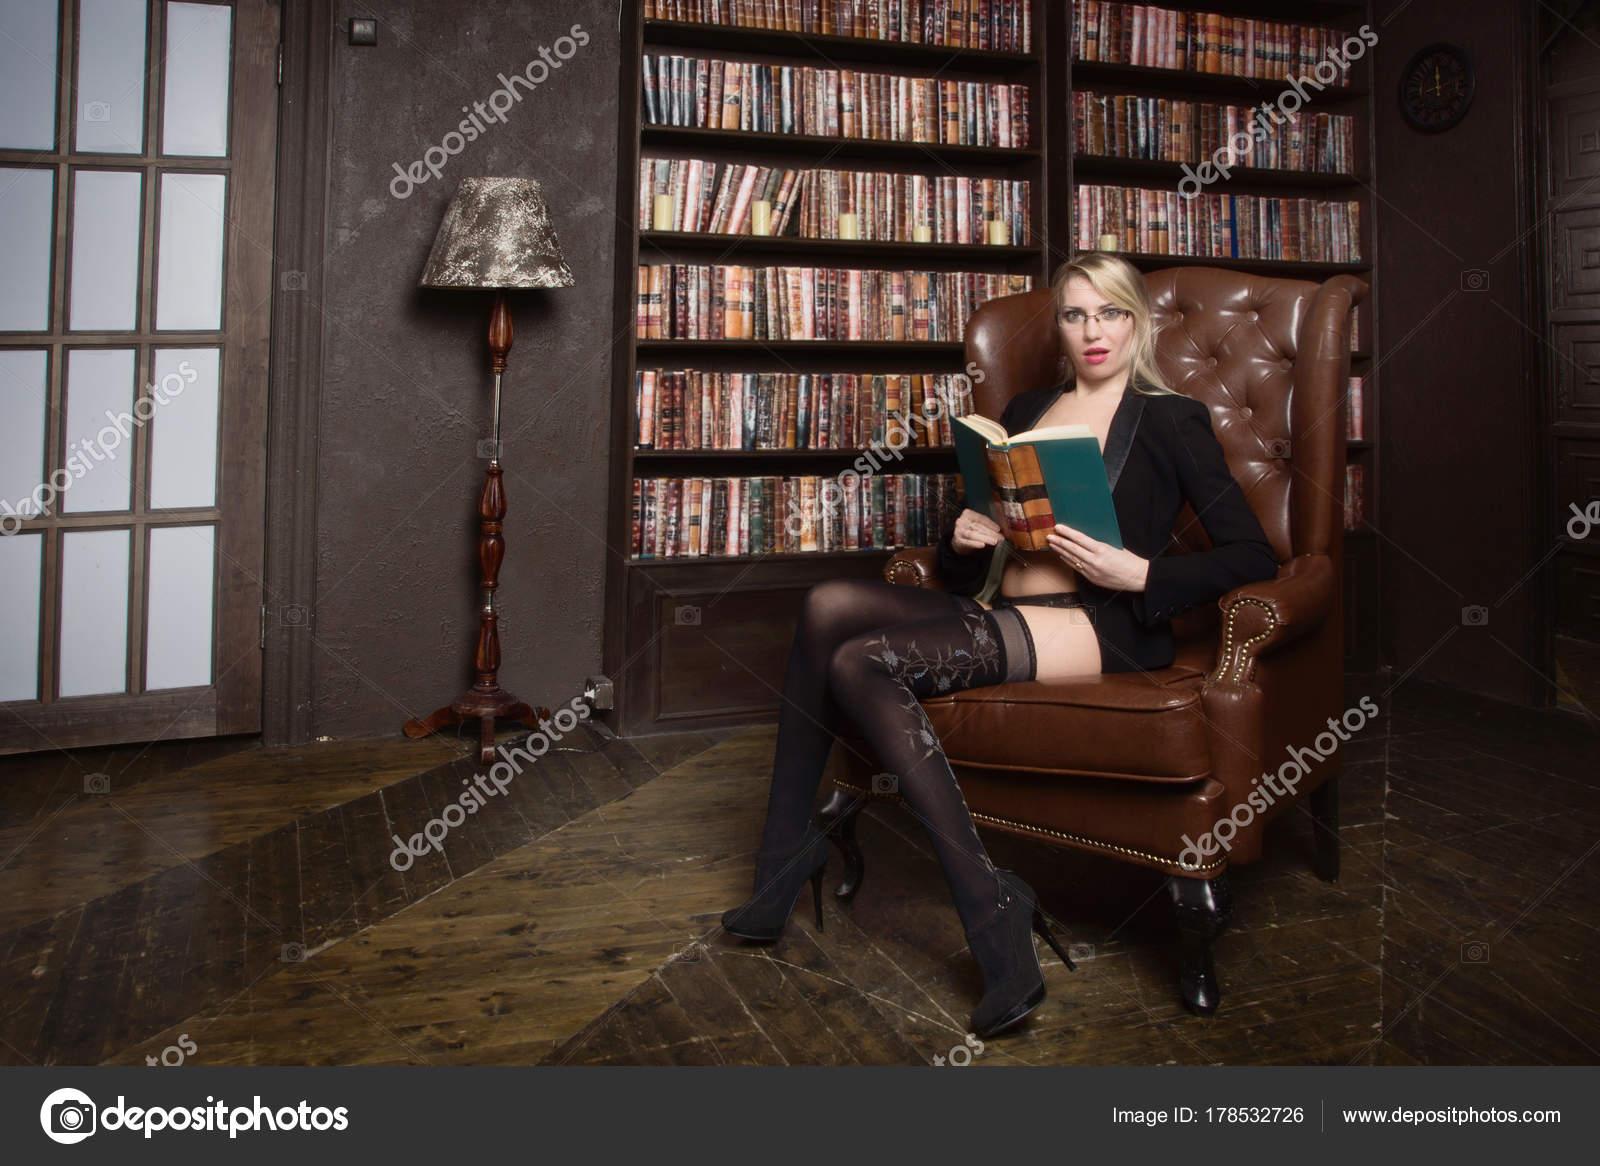 best of Library erotic Photo